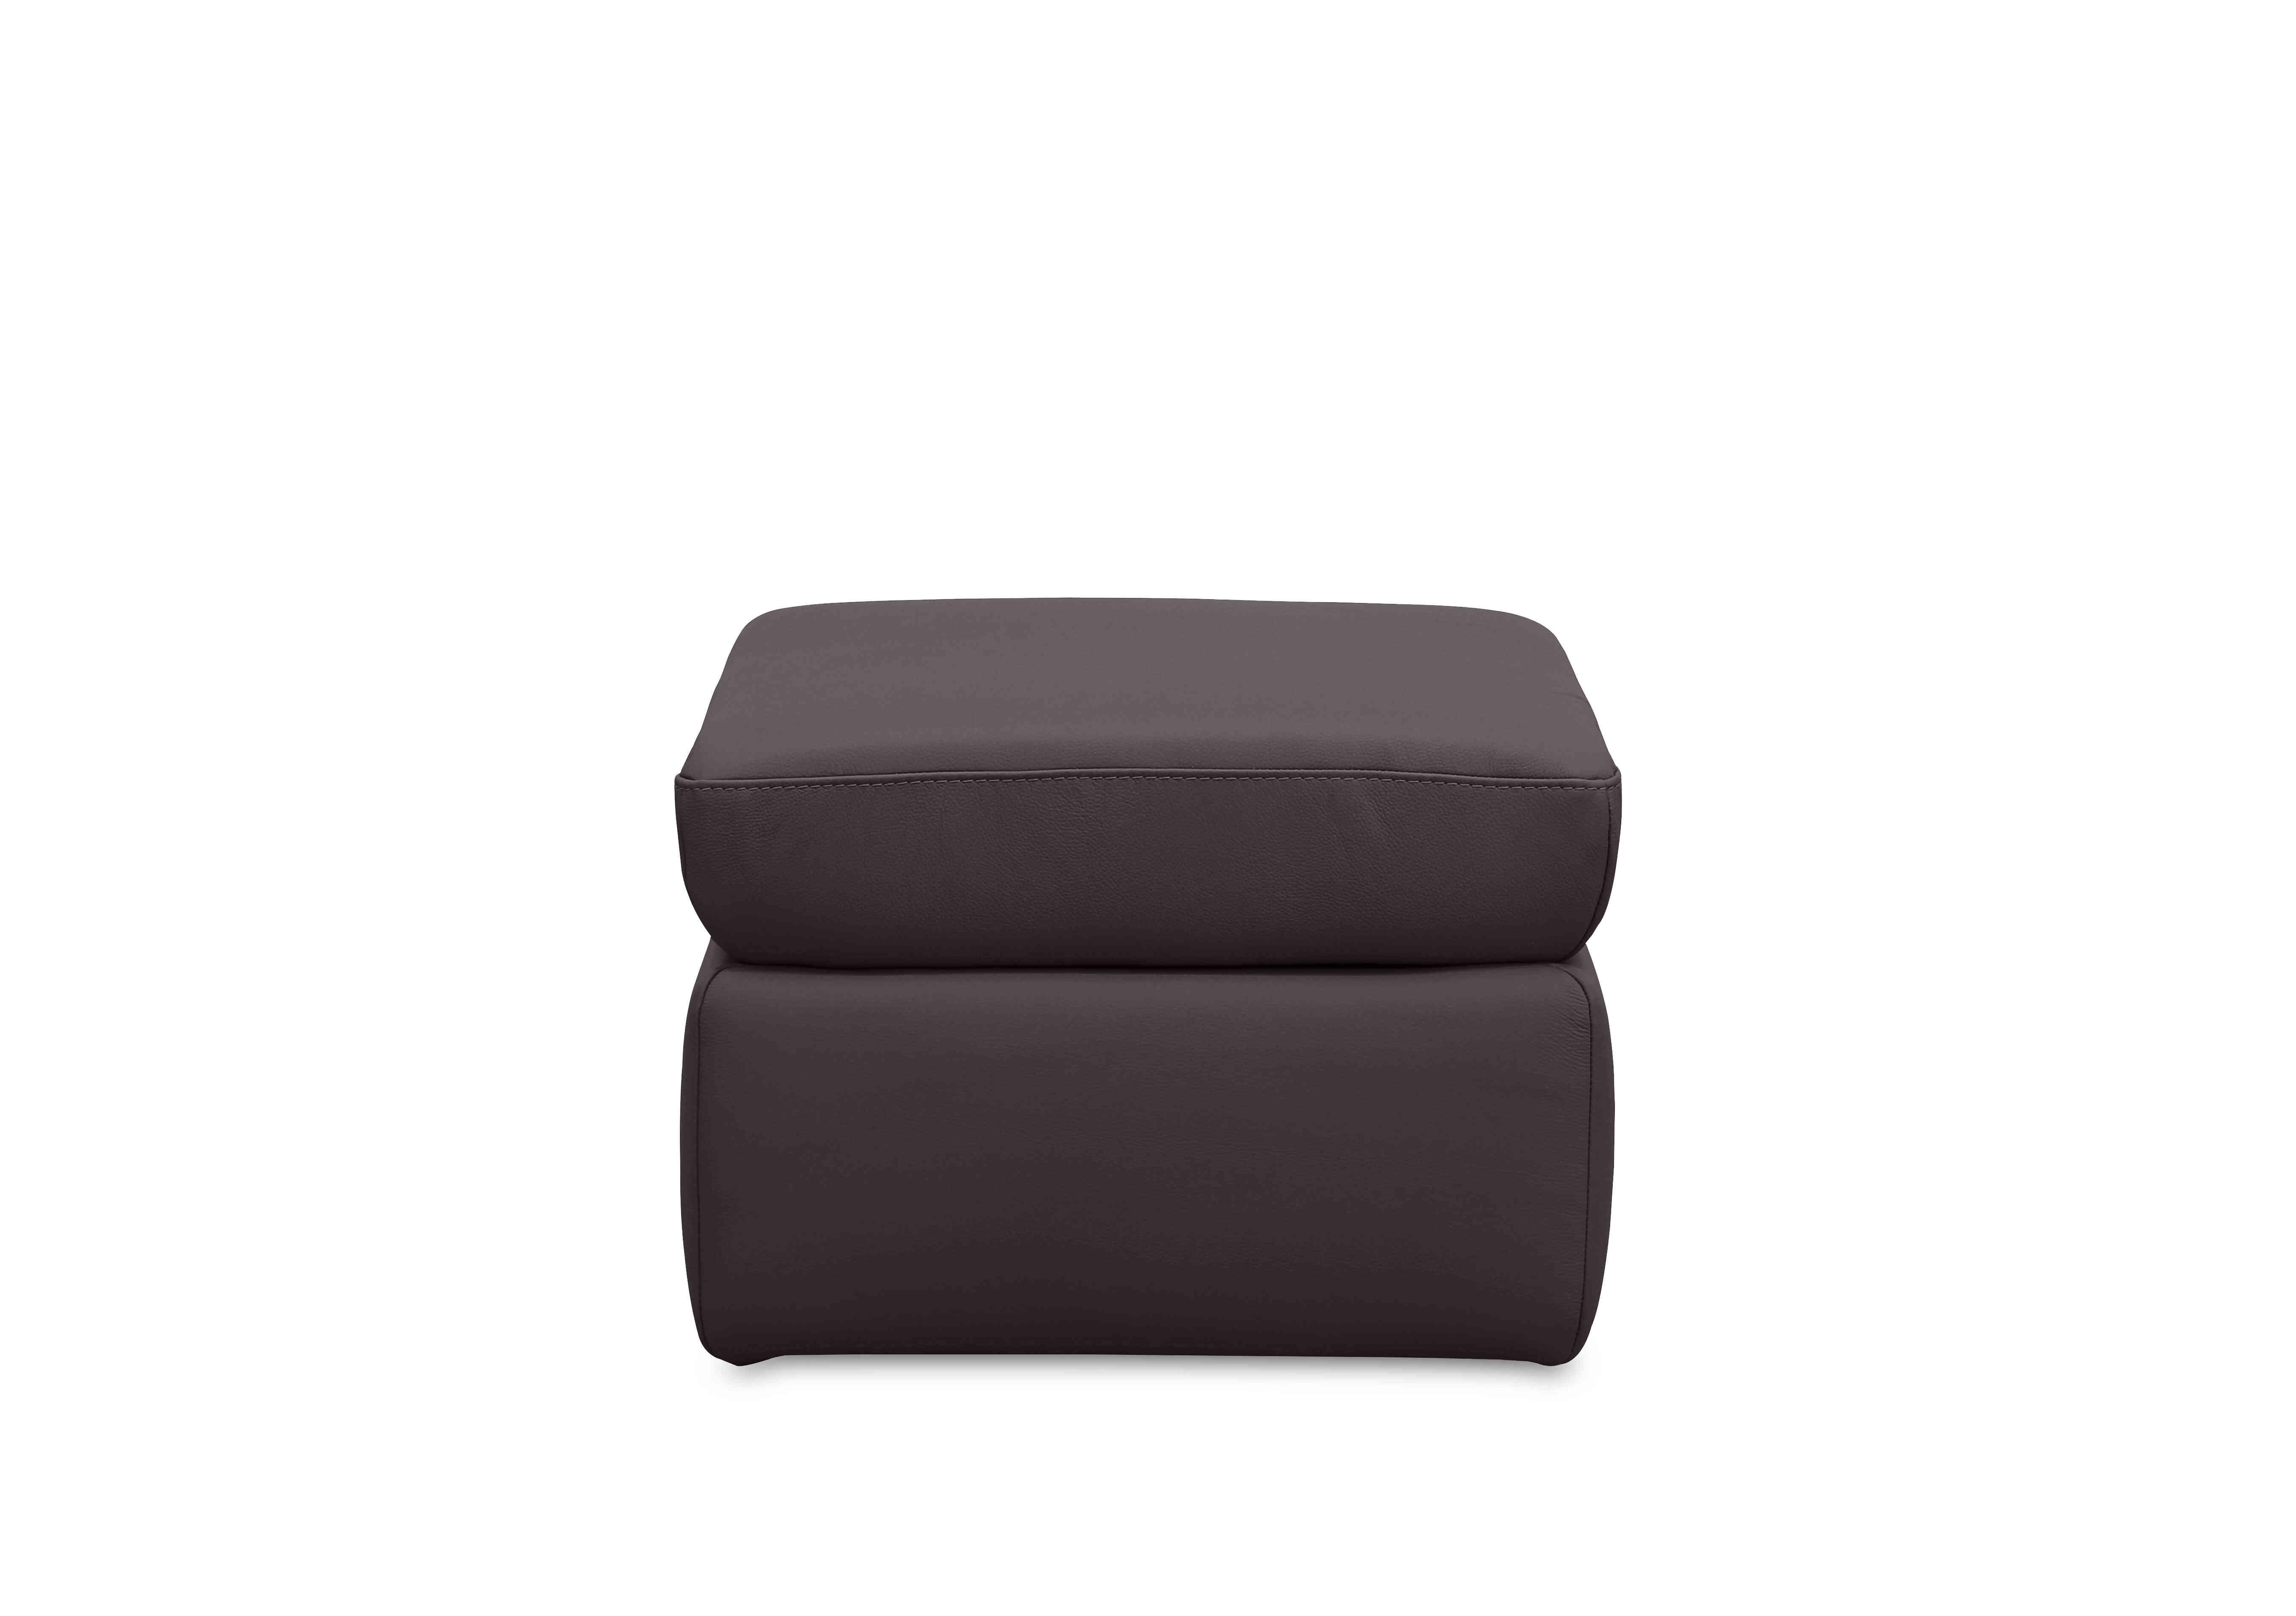 Quinn Leather Storage Footstool in Lx-6404 Piompo on Furniture Village